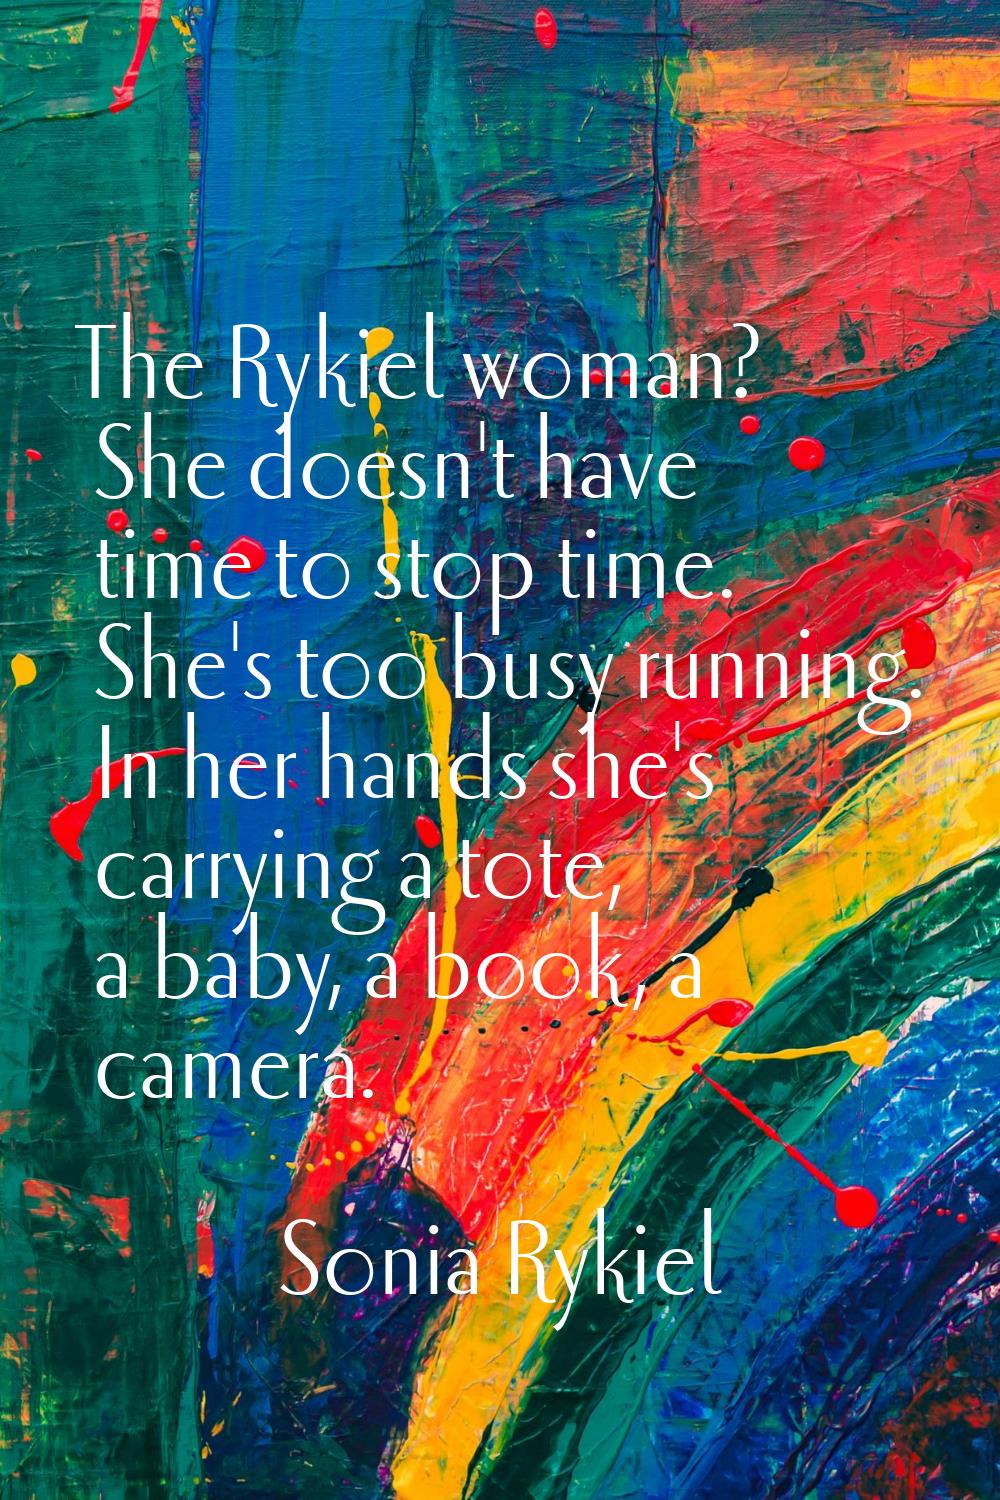 The Rykiel woman? She doesn't have time to stop time. She's too busy running. In her hands she's ca